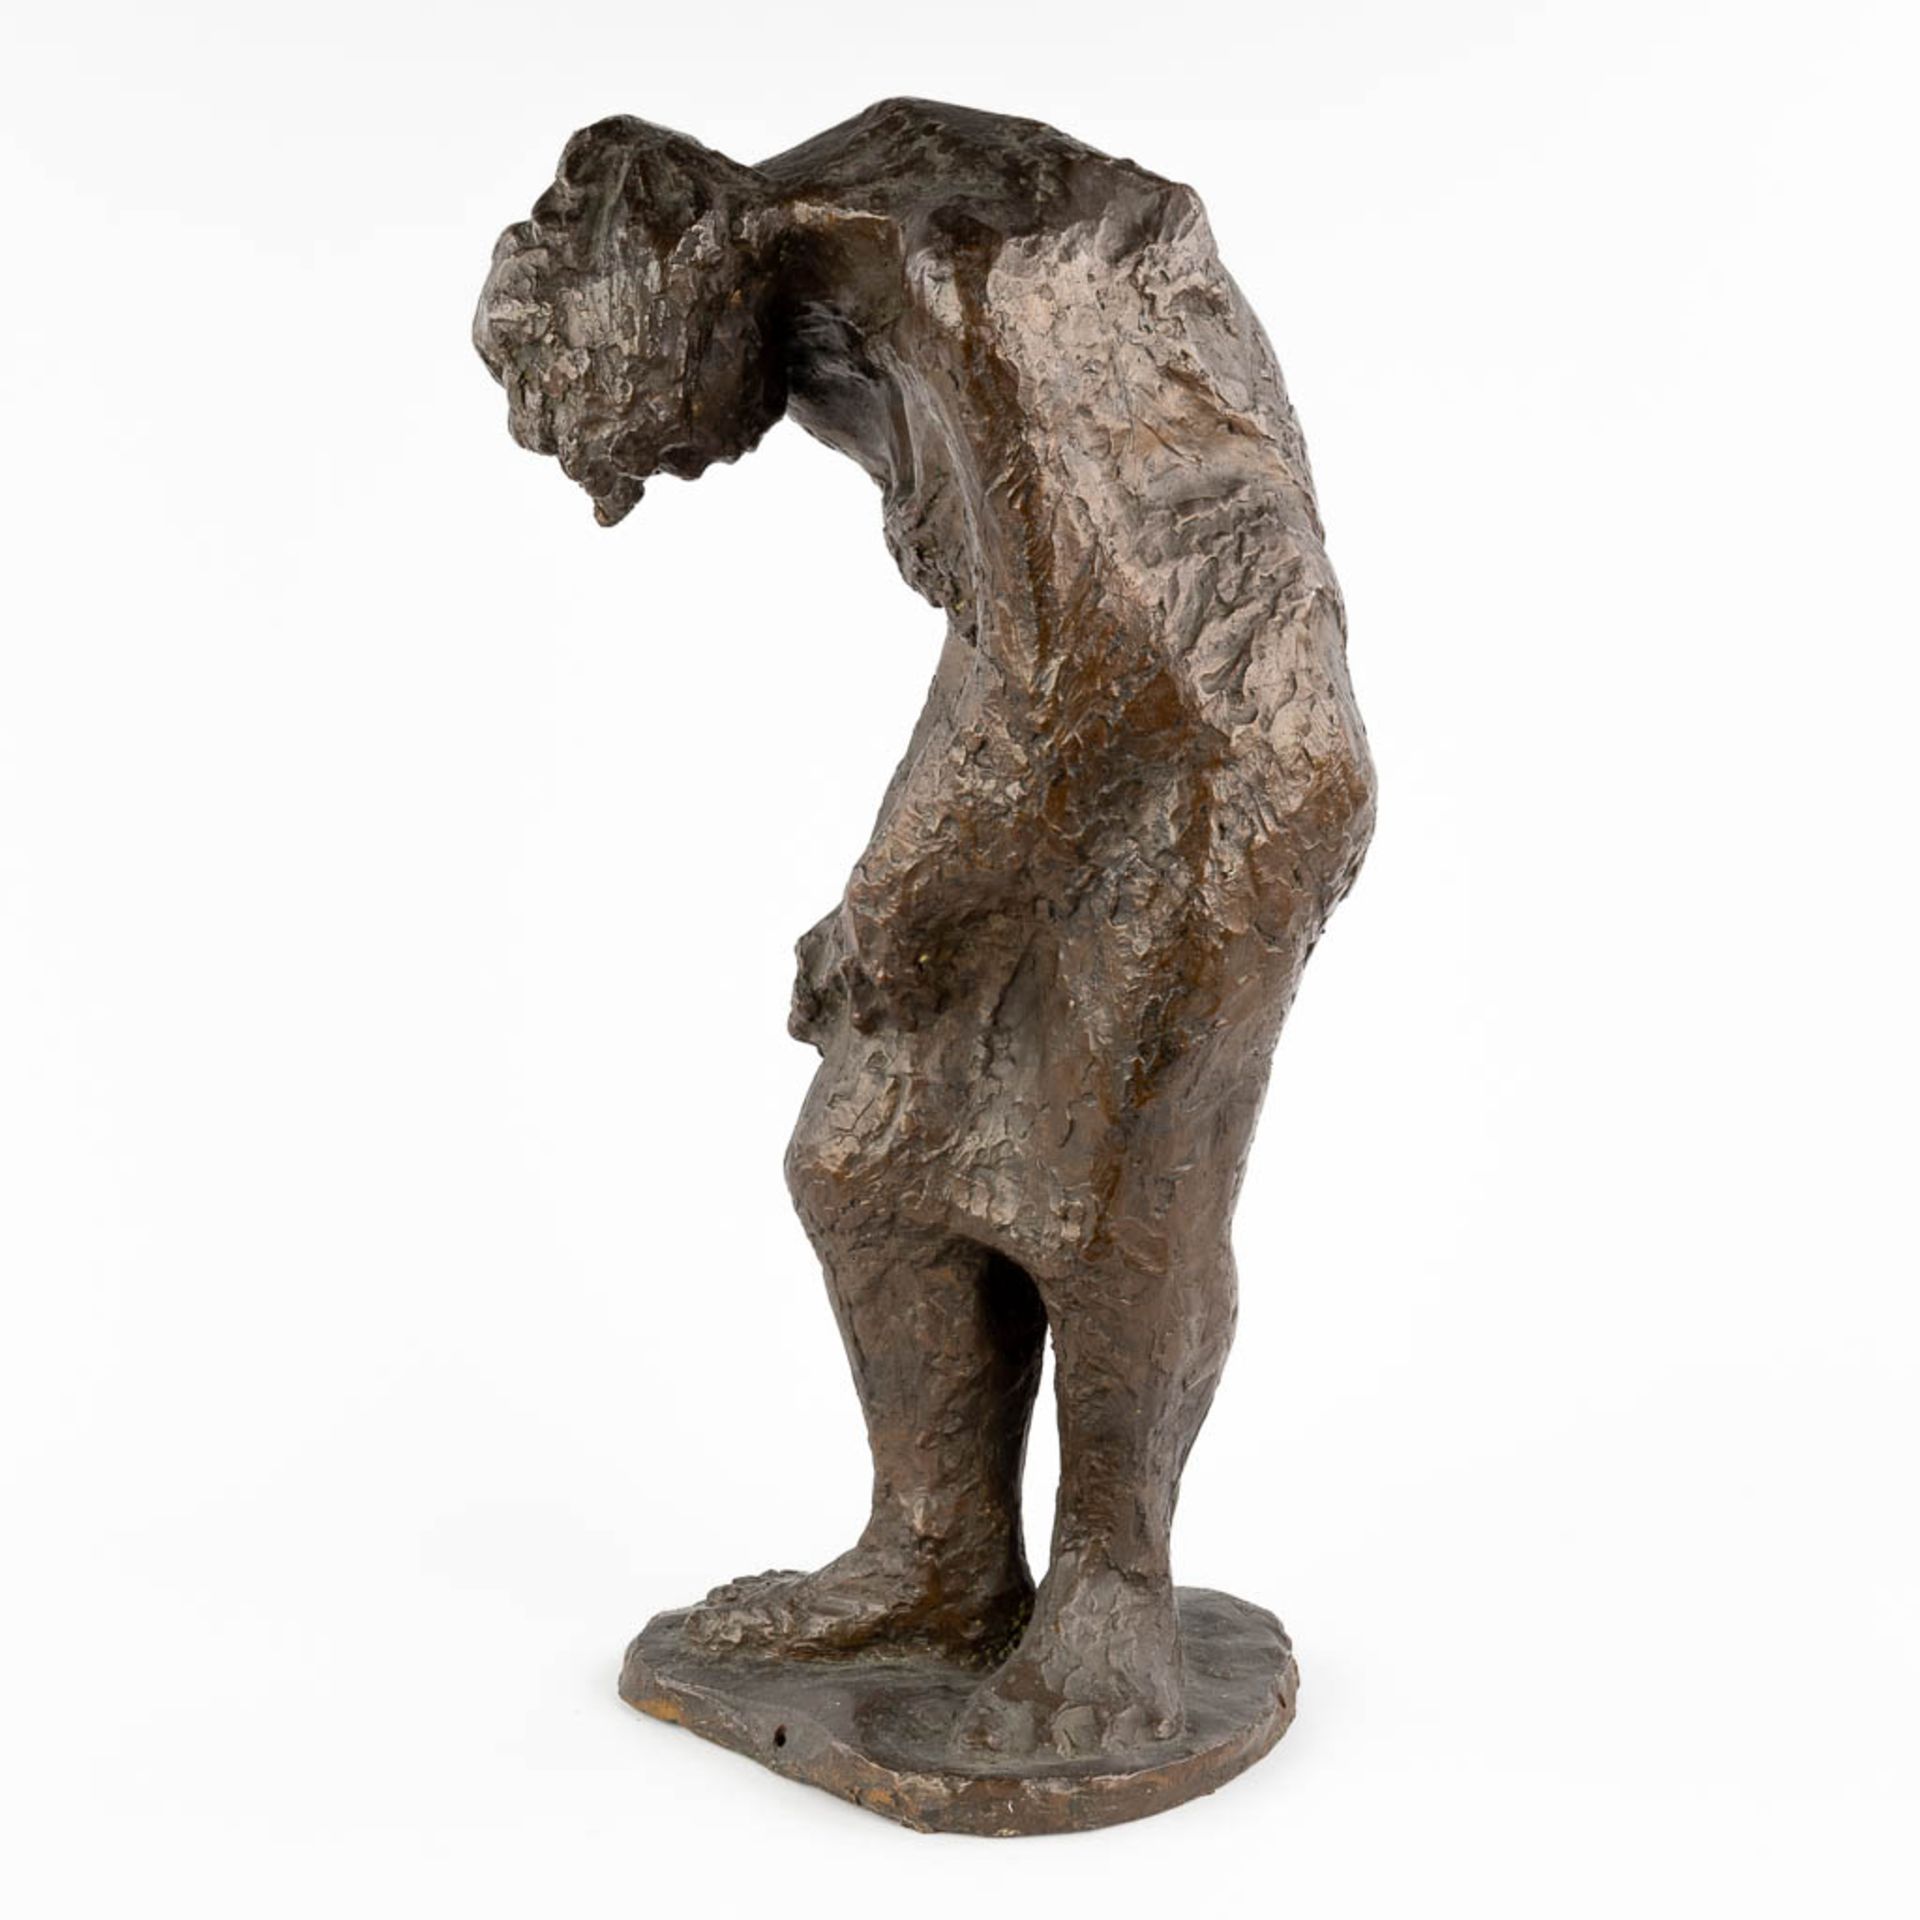 Leaning woman, a figurine, patinated bronze, probably cire perdue. Mongrammed. (H:59 cm) - Image 7 of 13